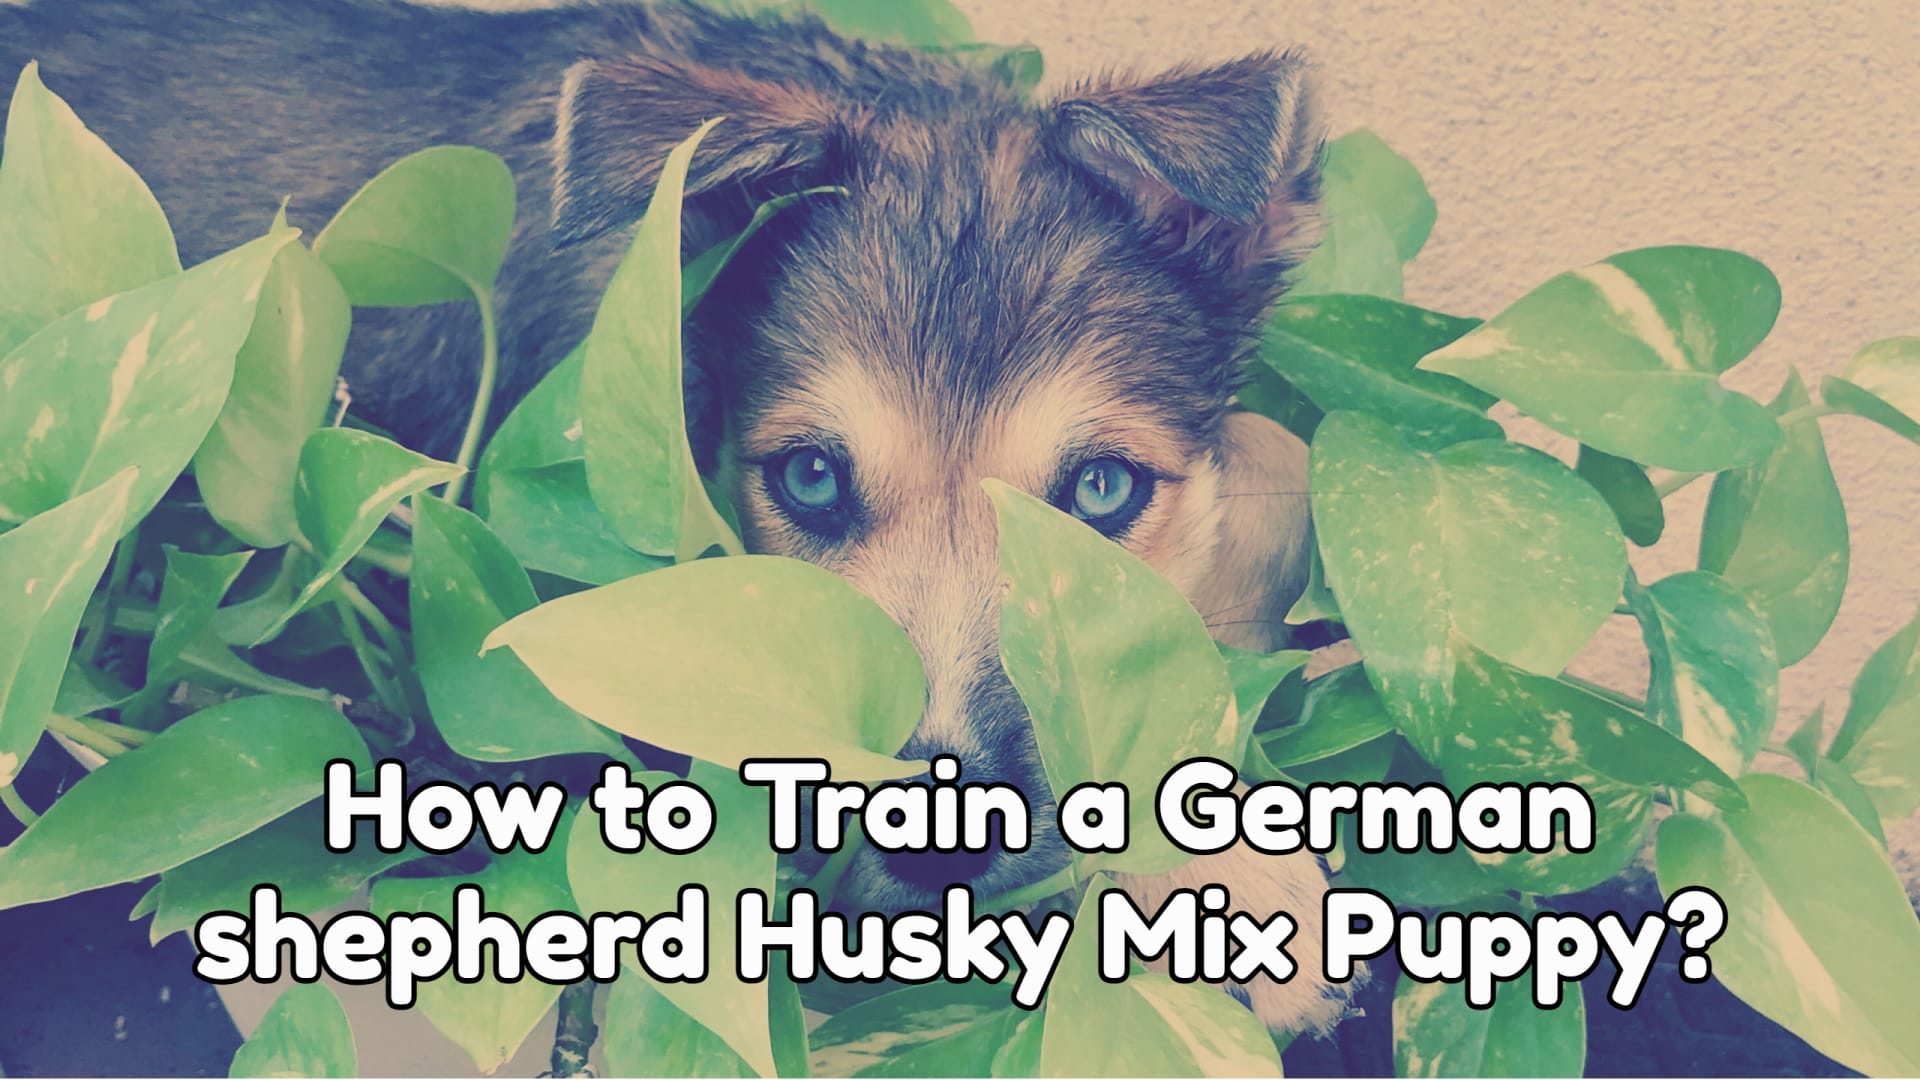 A Complete Guide of How to Train a German shepherd Husky